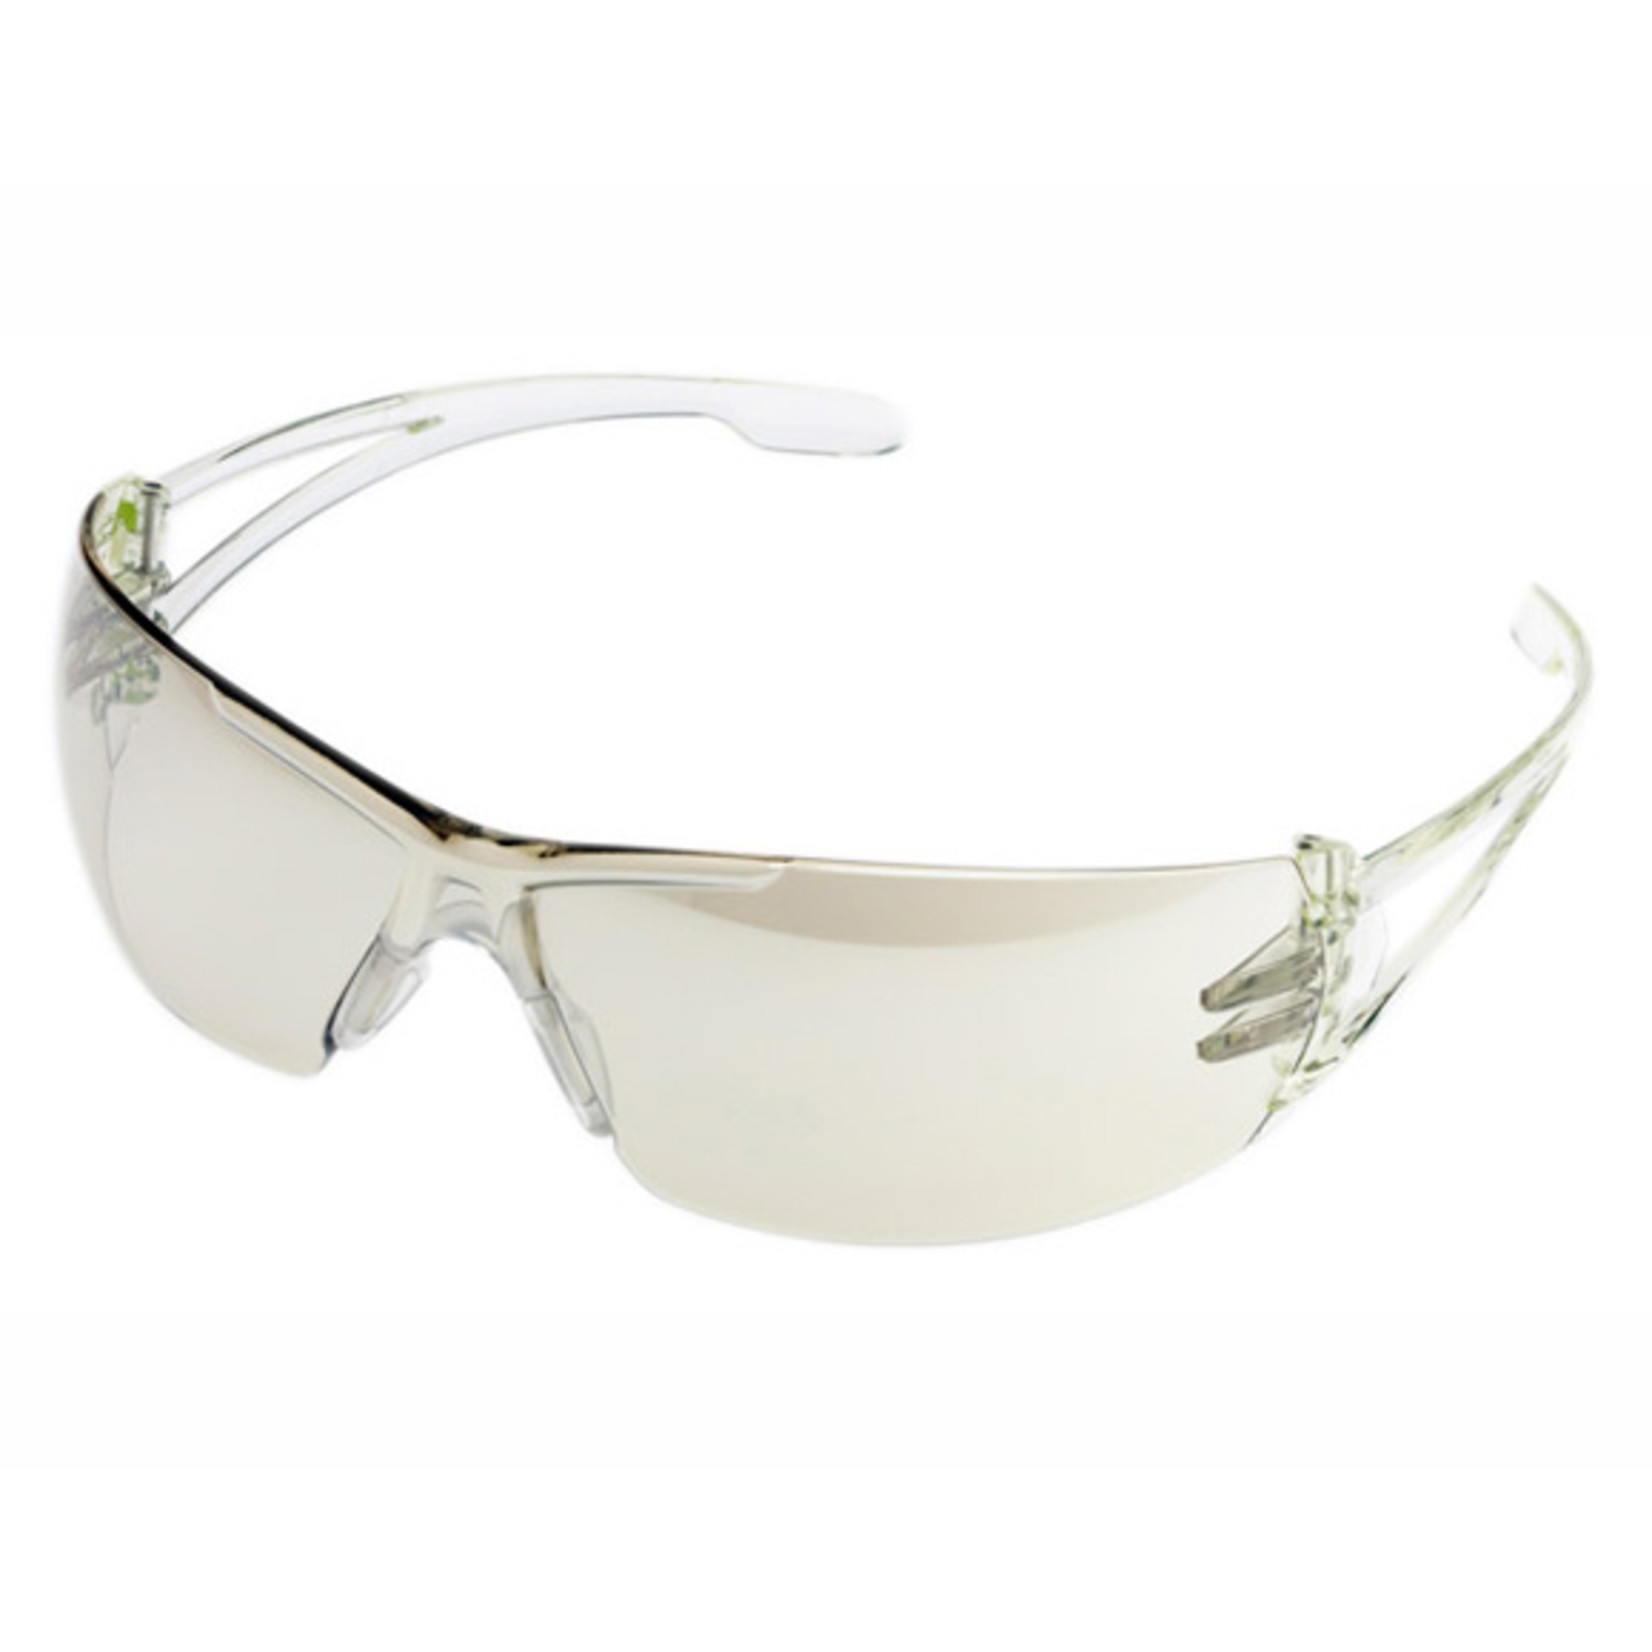 Gateway Safety 270M Varsity Safety Glasses Clear Temples / Clear Mirror Lens